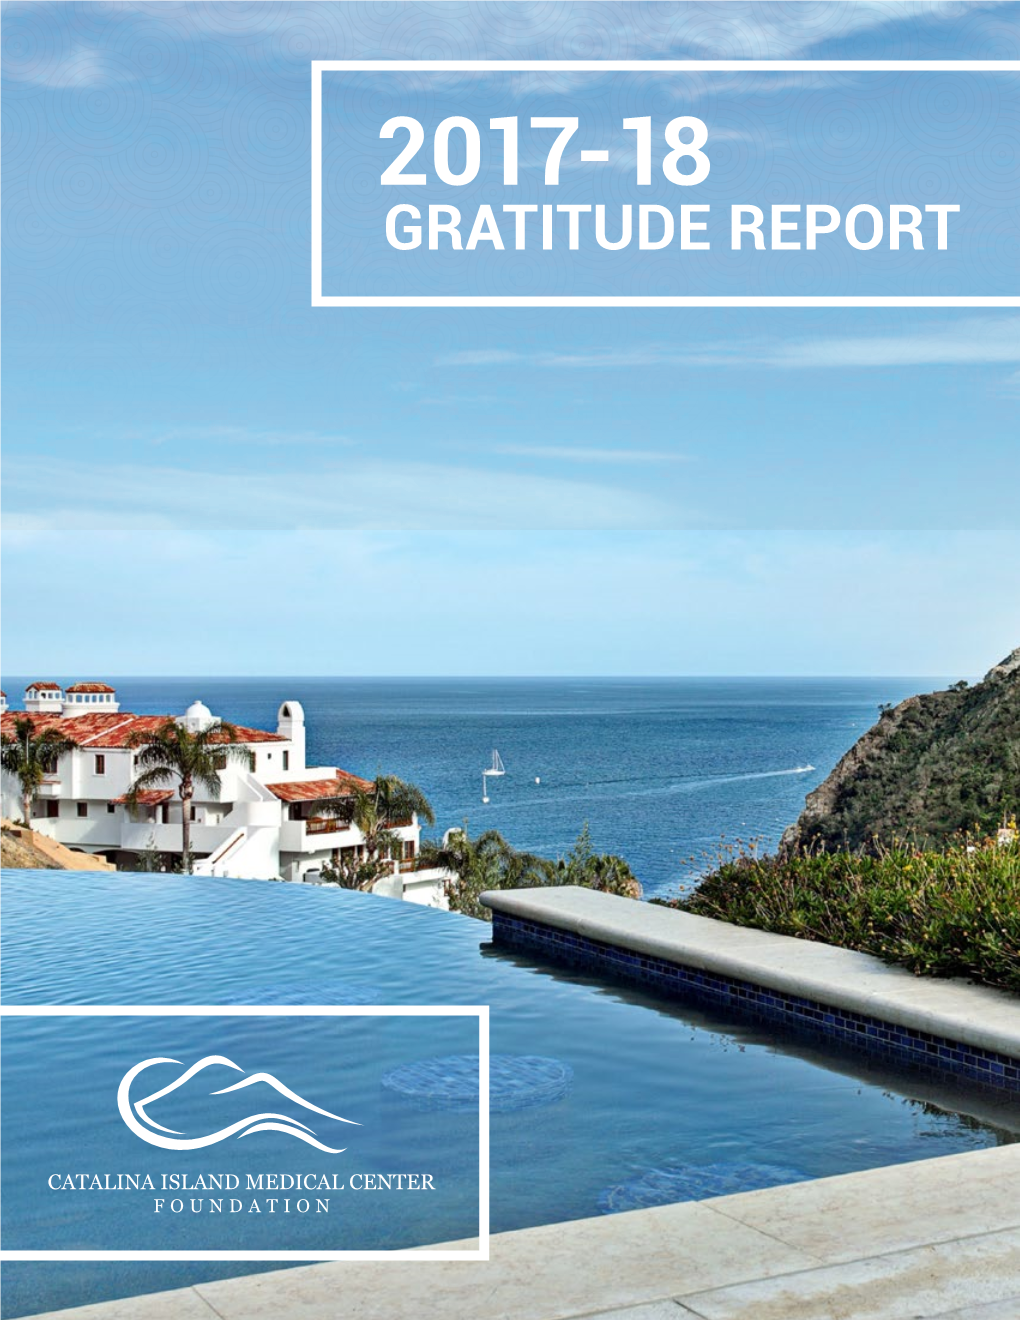 GRATITUDE REPORT from the MISSION FOUNDATION STATEMENT Dear Friends of the Catalina Island Medical Center Foundation